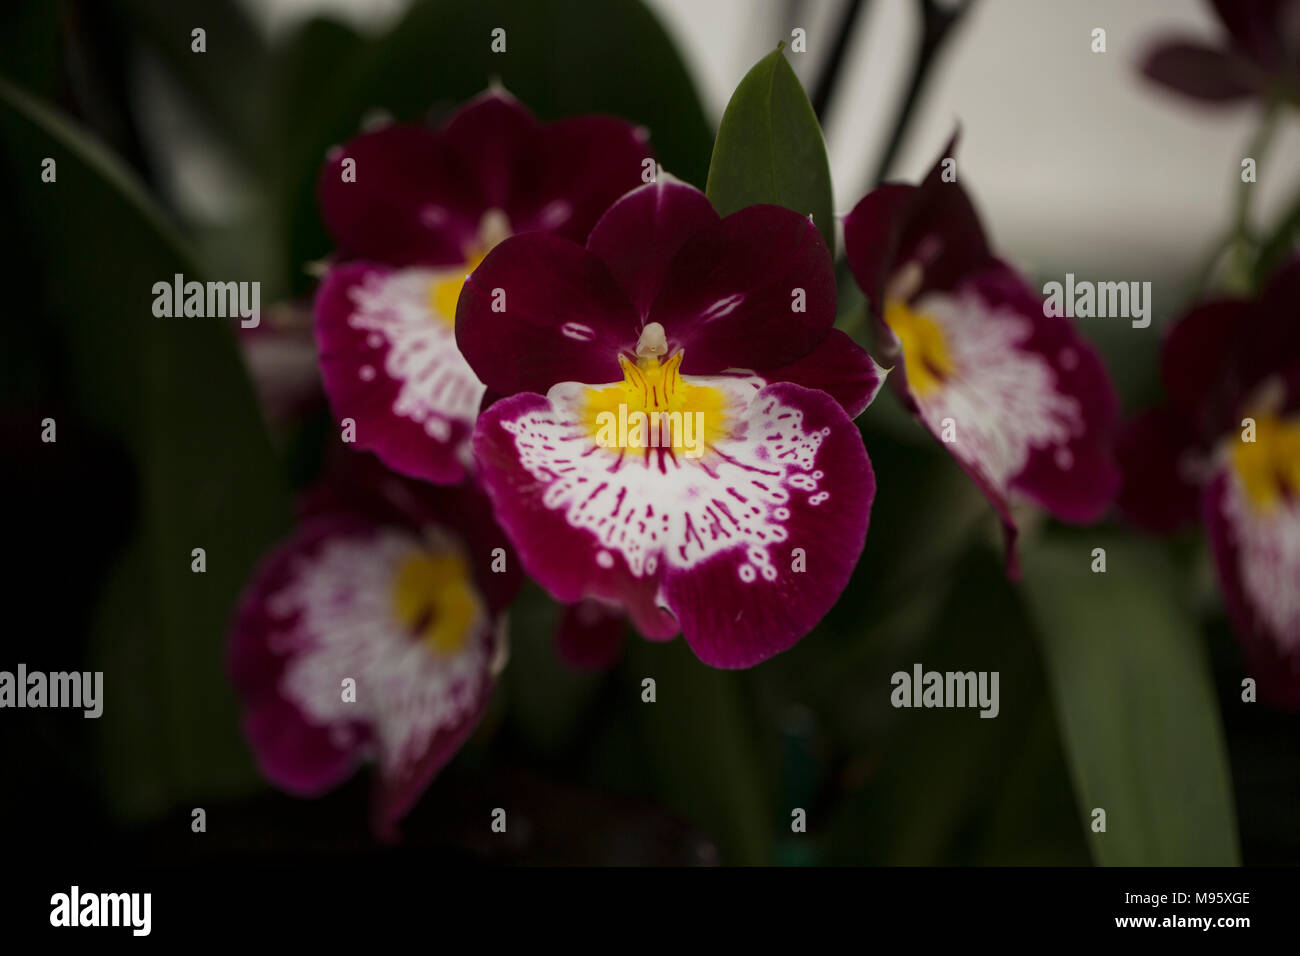 Miltonia orchid, also known as pansy orchid. Stock Photo